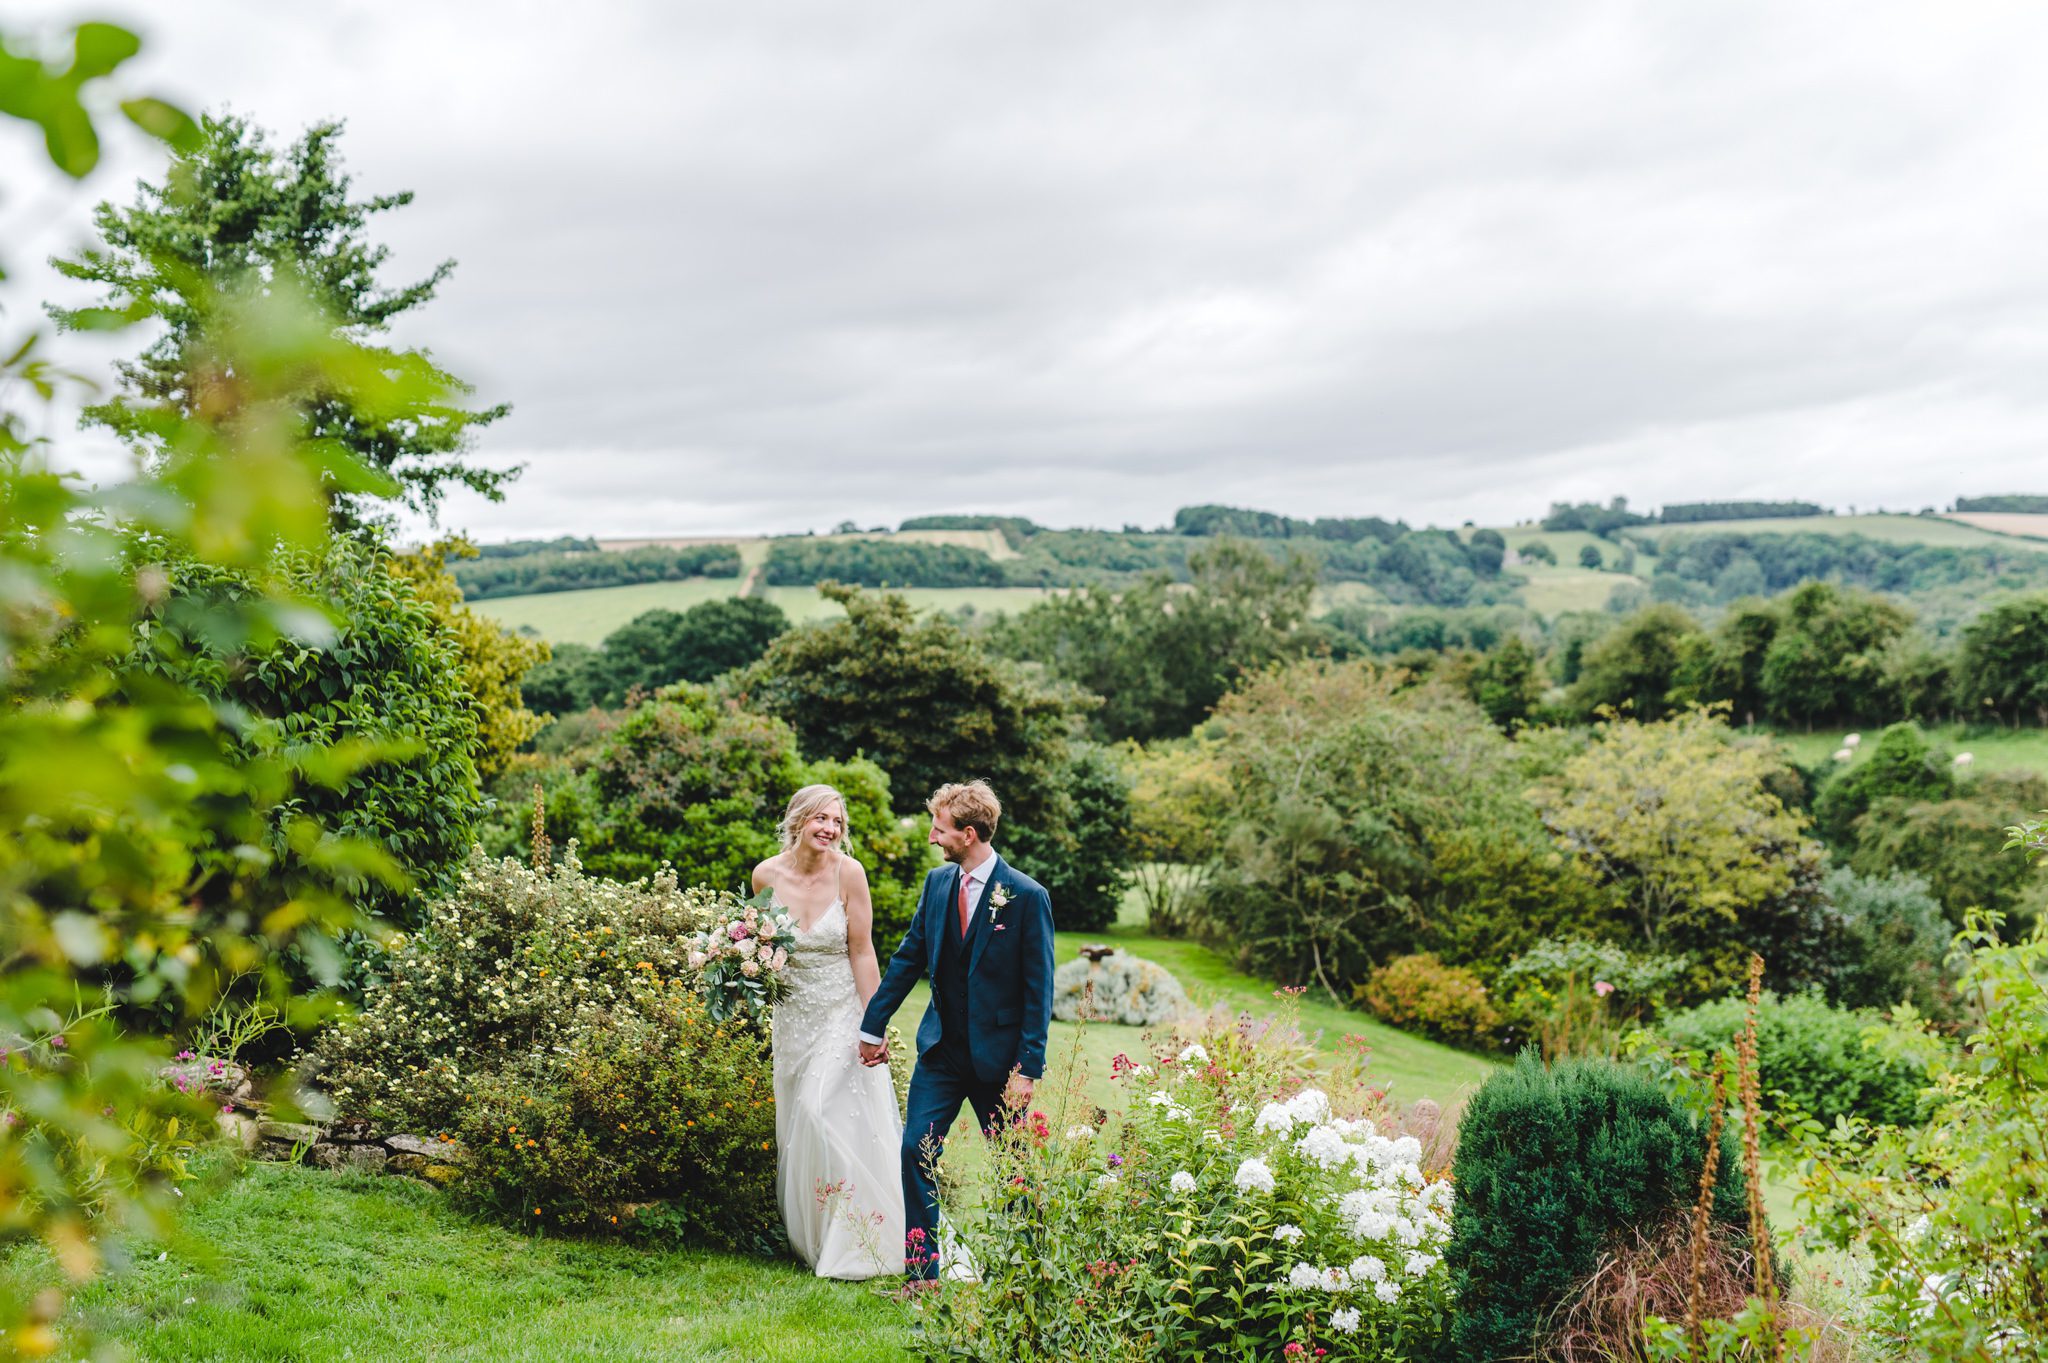 A bride and groom in Cotswolds scenery